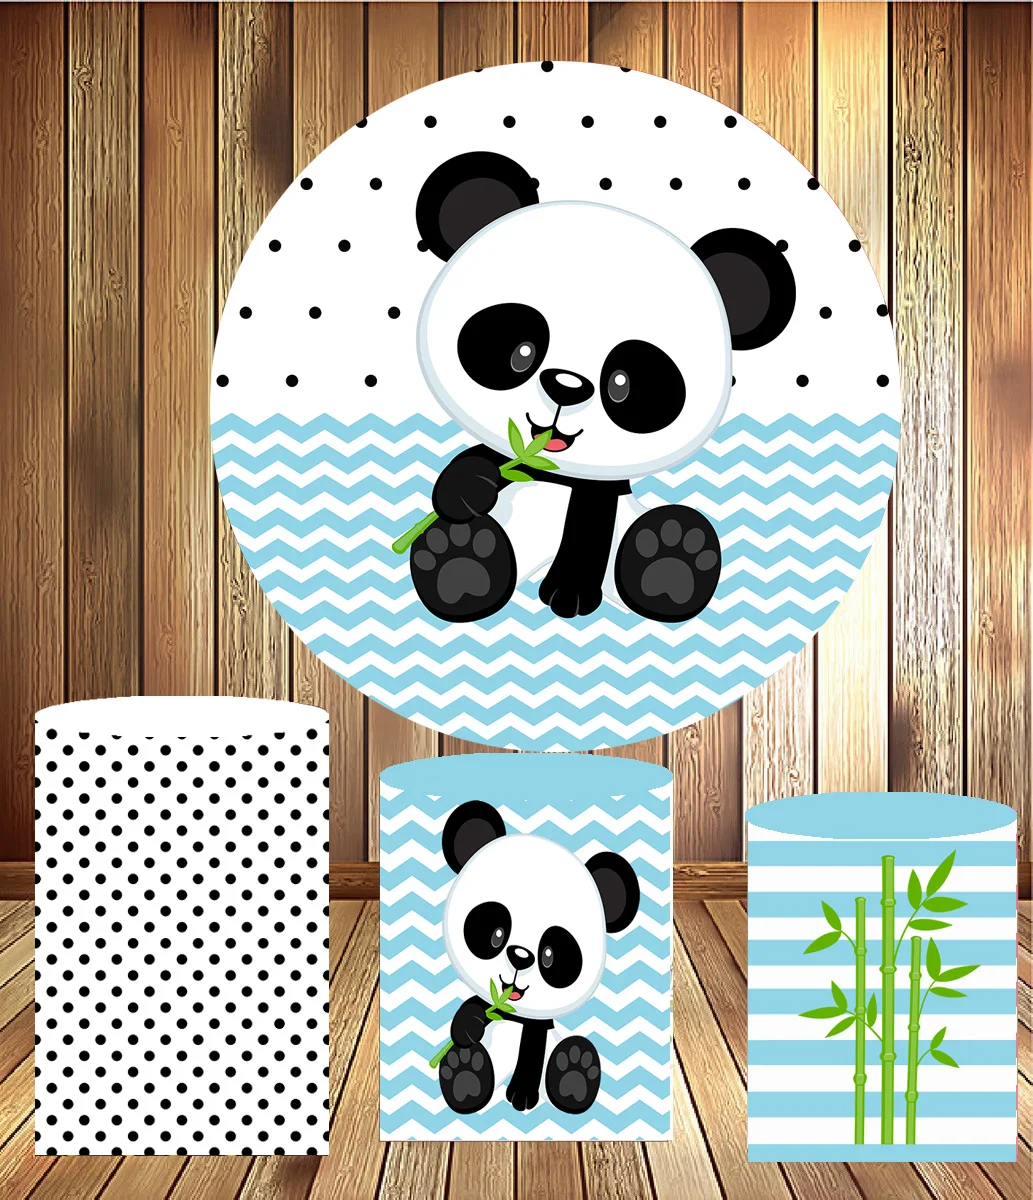 Round circle background birthday mini cake table party decor cute panda blue boy baby shower  fabric 3 cylinder plinth cover